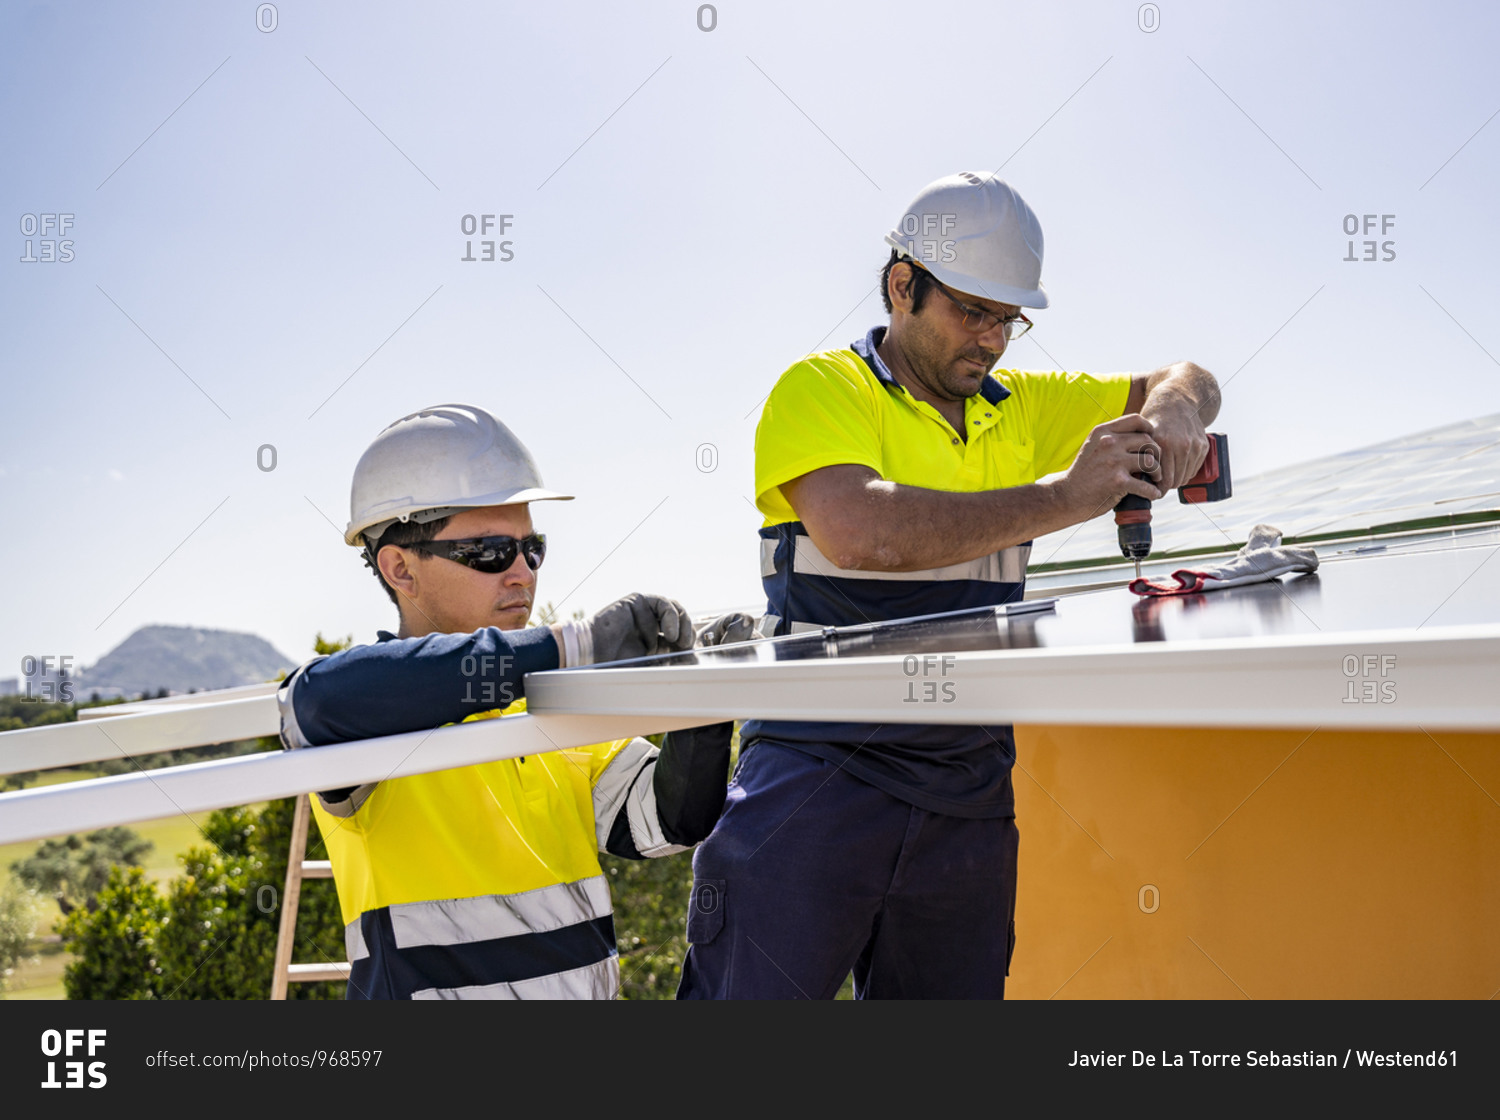 Male technicians installing solar panels on house roof against sky during sunny day